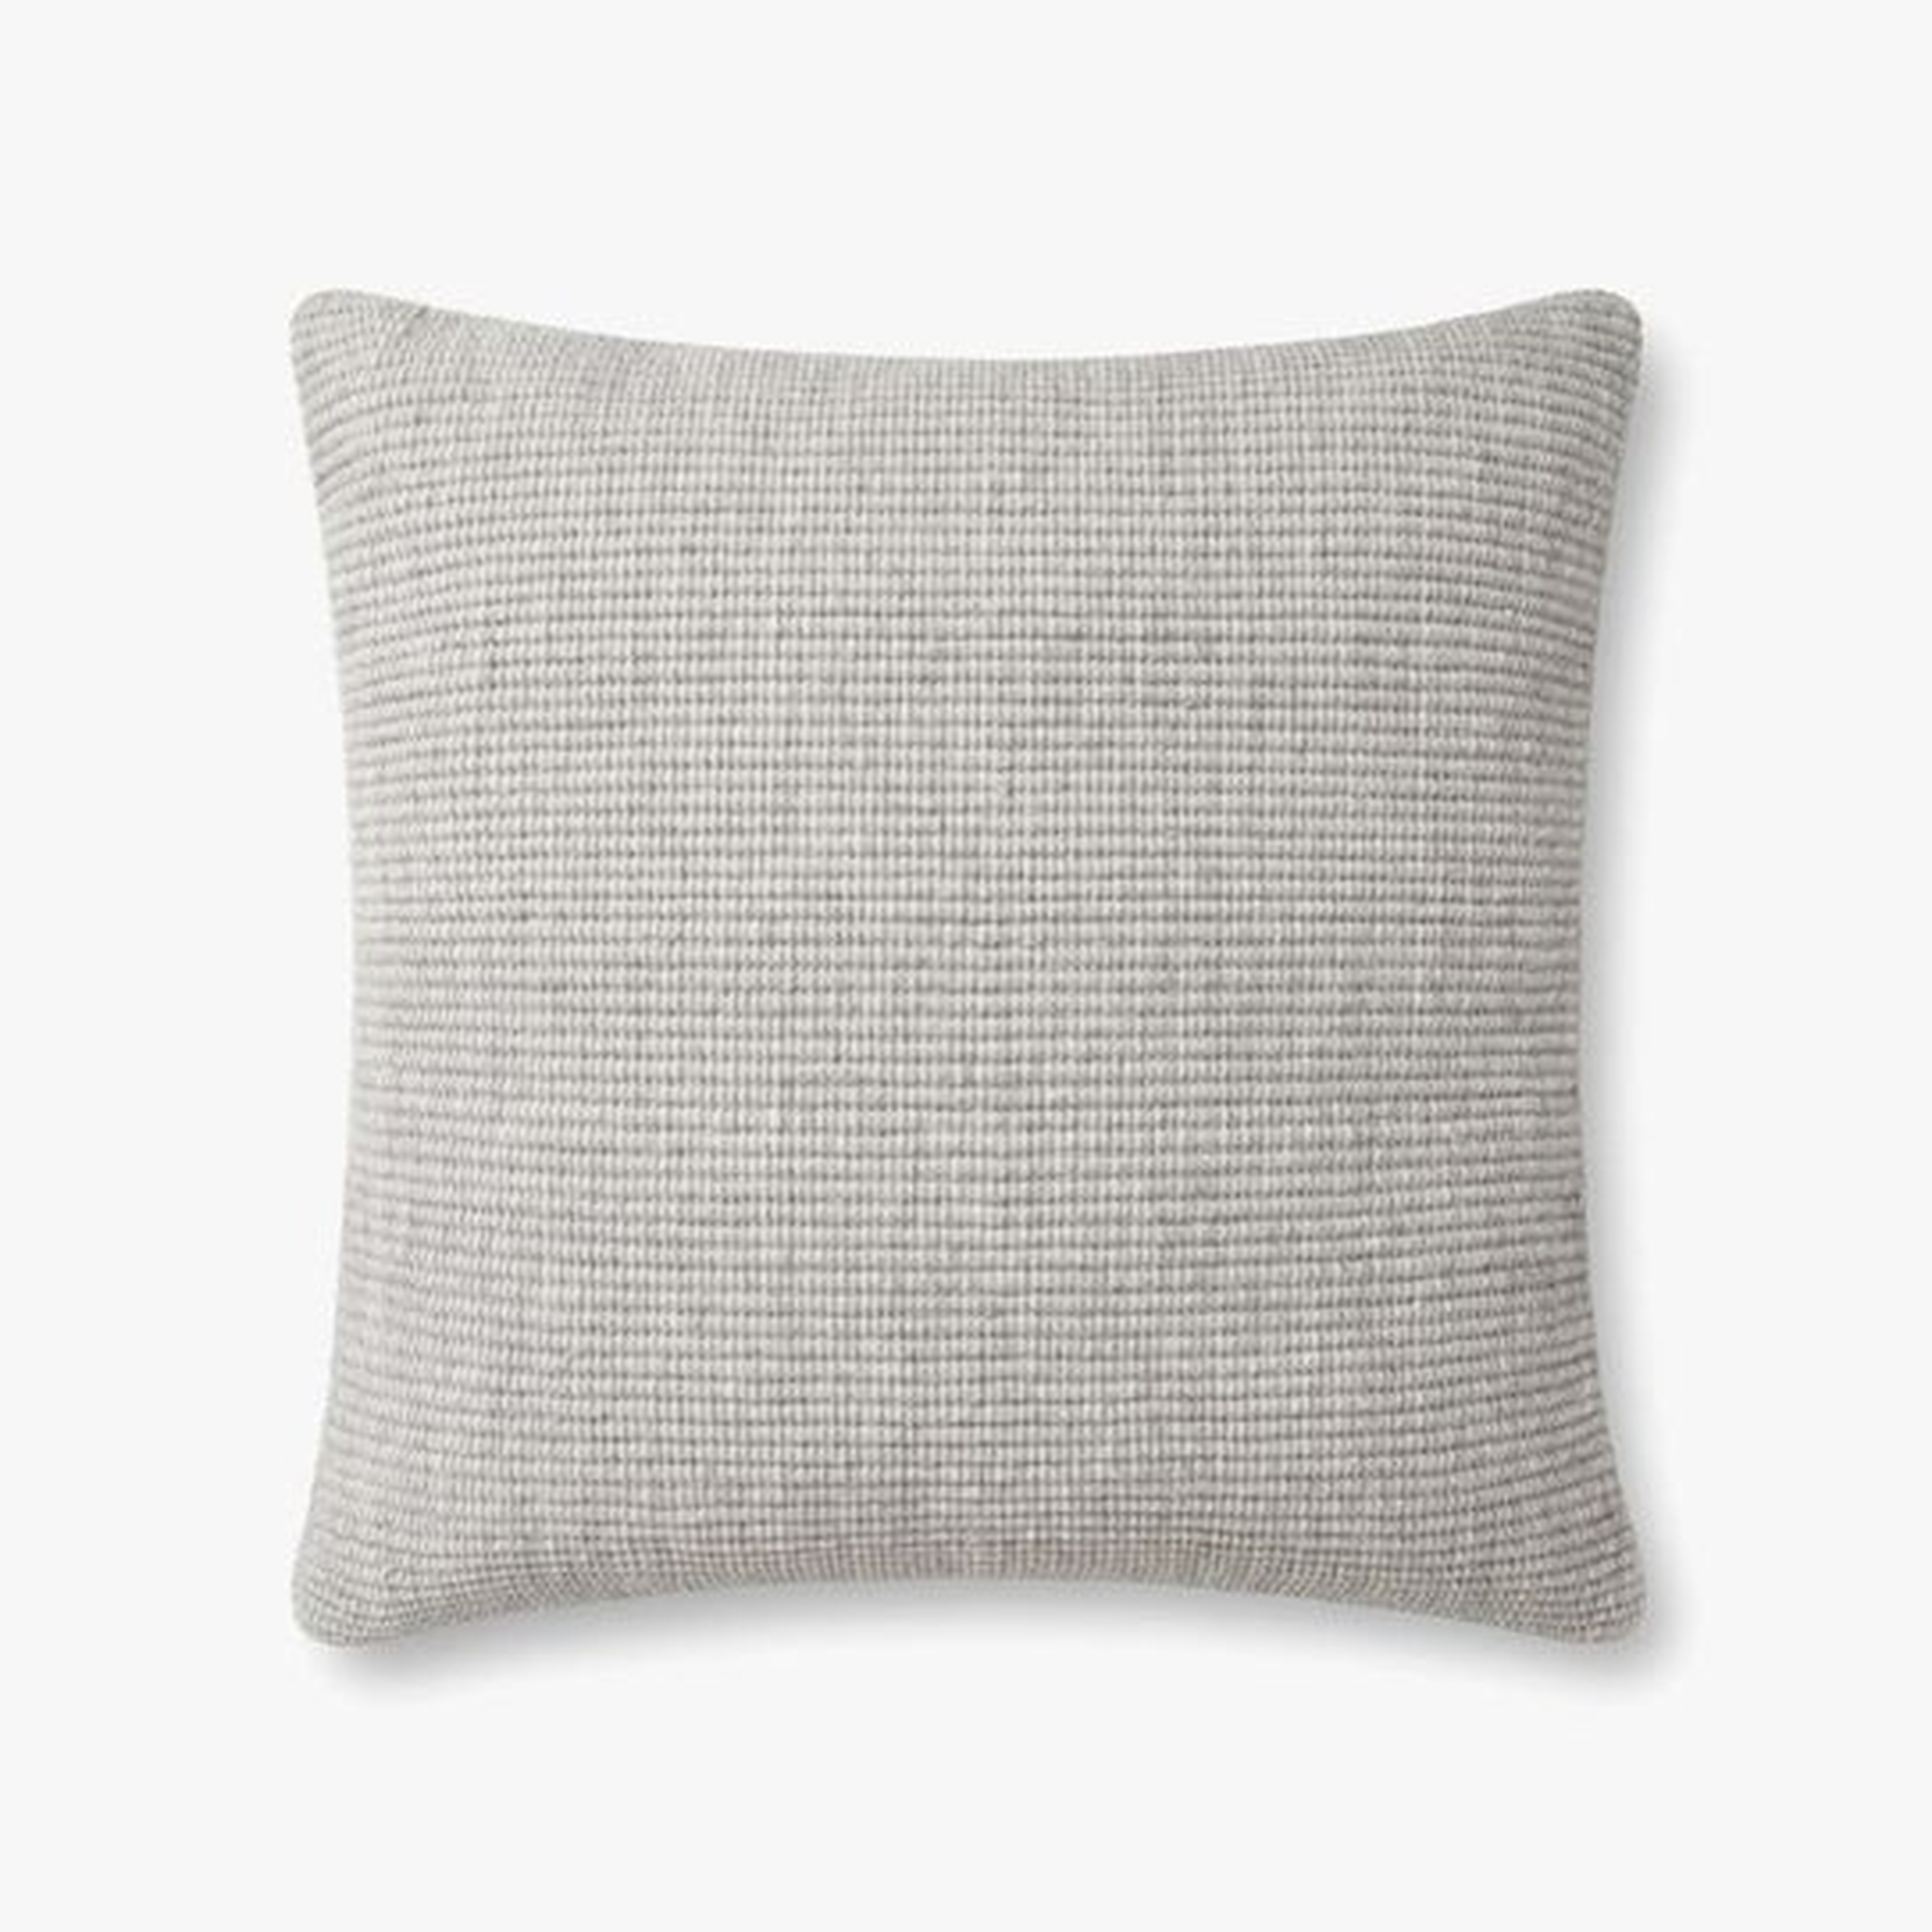 PILLOWS PMH0020 SMOKE 22" x 22" Cover w/Down - Magnolia Home by Joana Gaines Crafted by Loloi Rugs